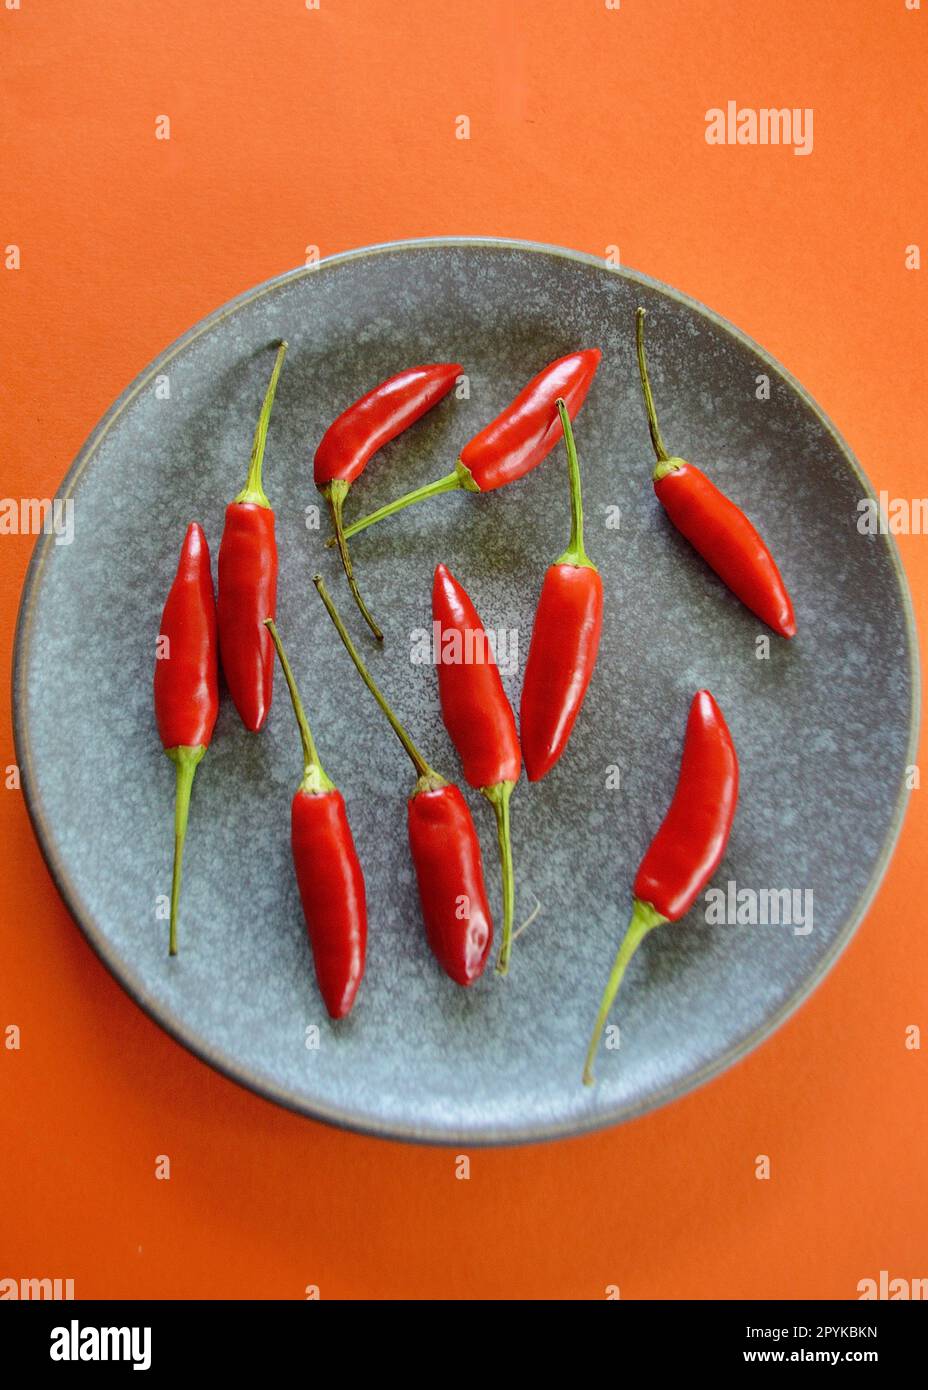 Red hot chili peppers in the kitchen Stock Photo